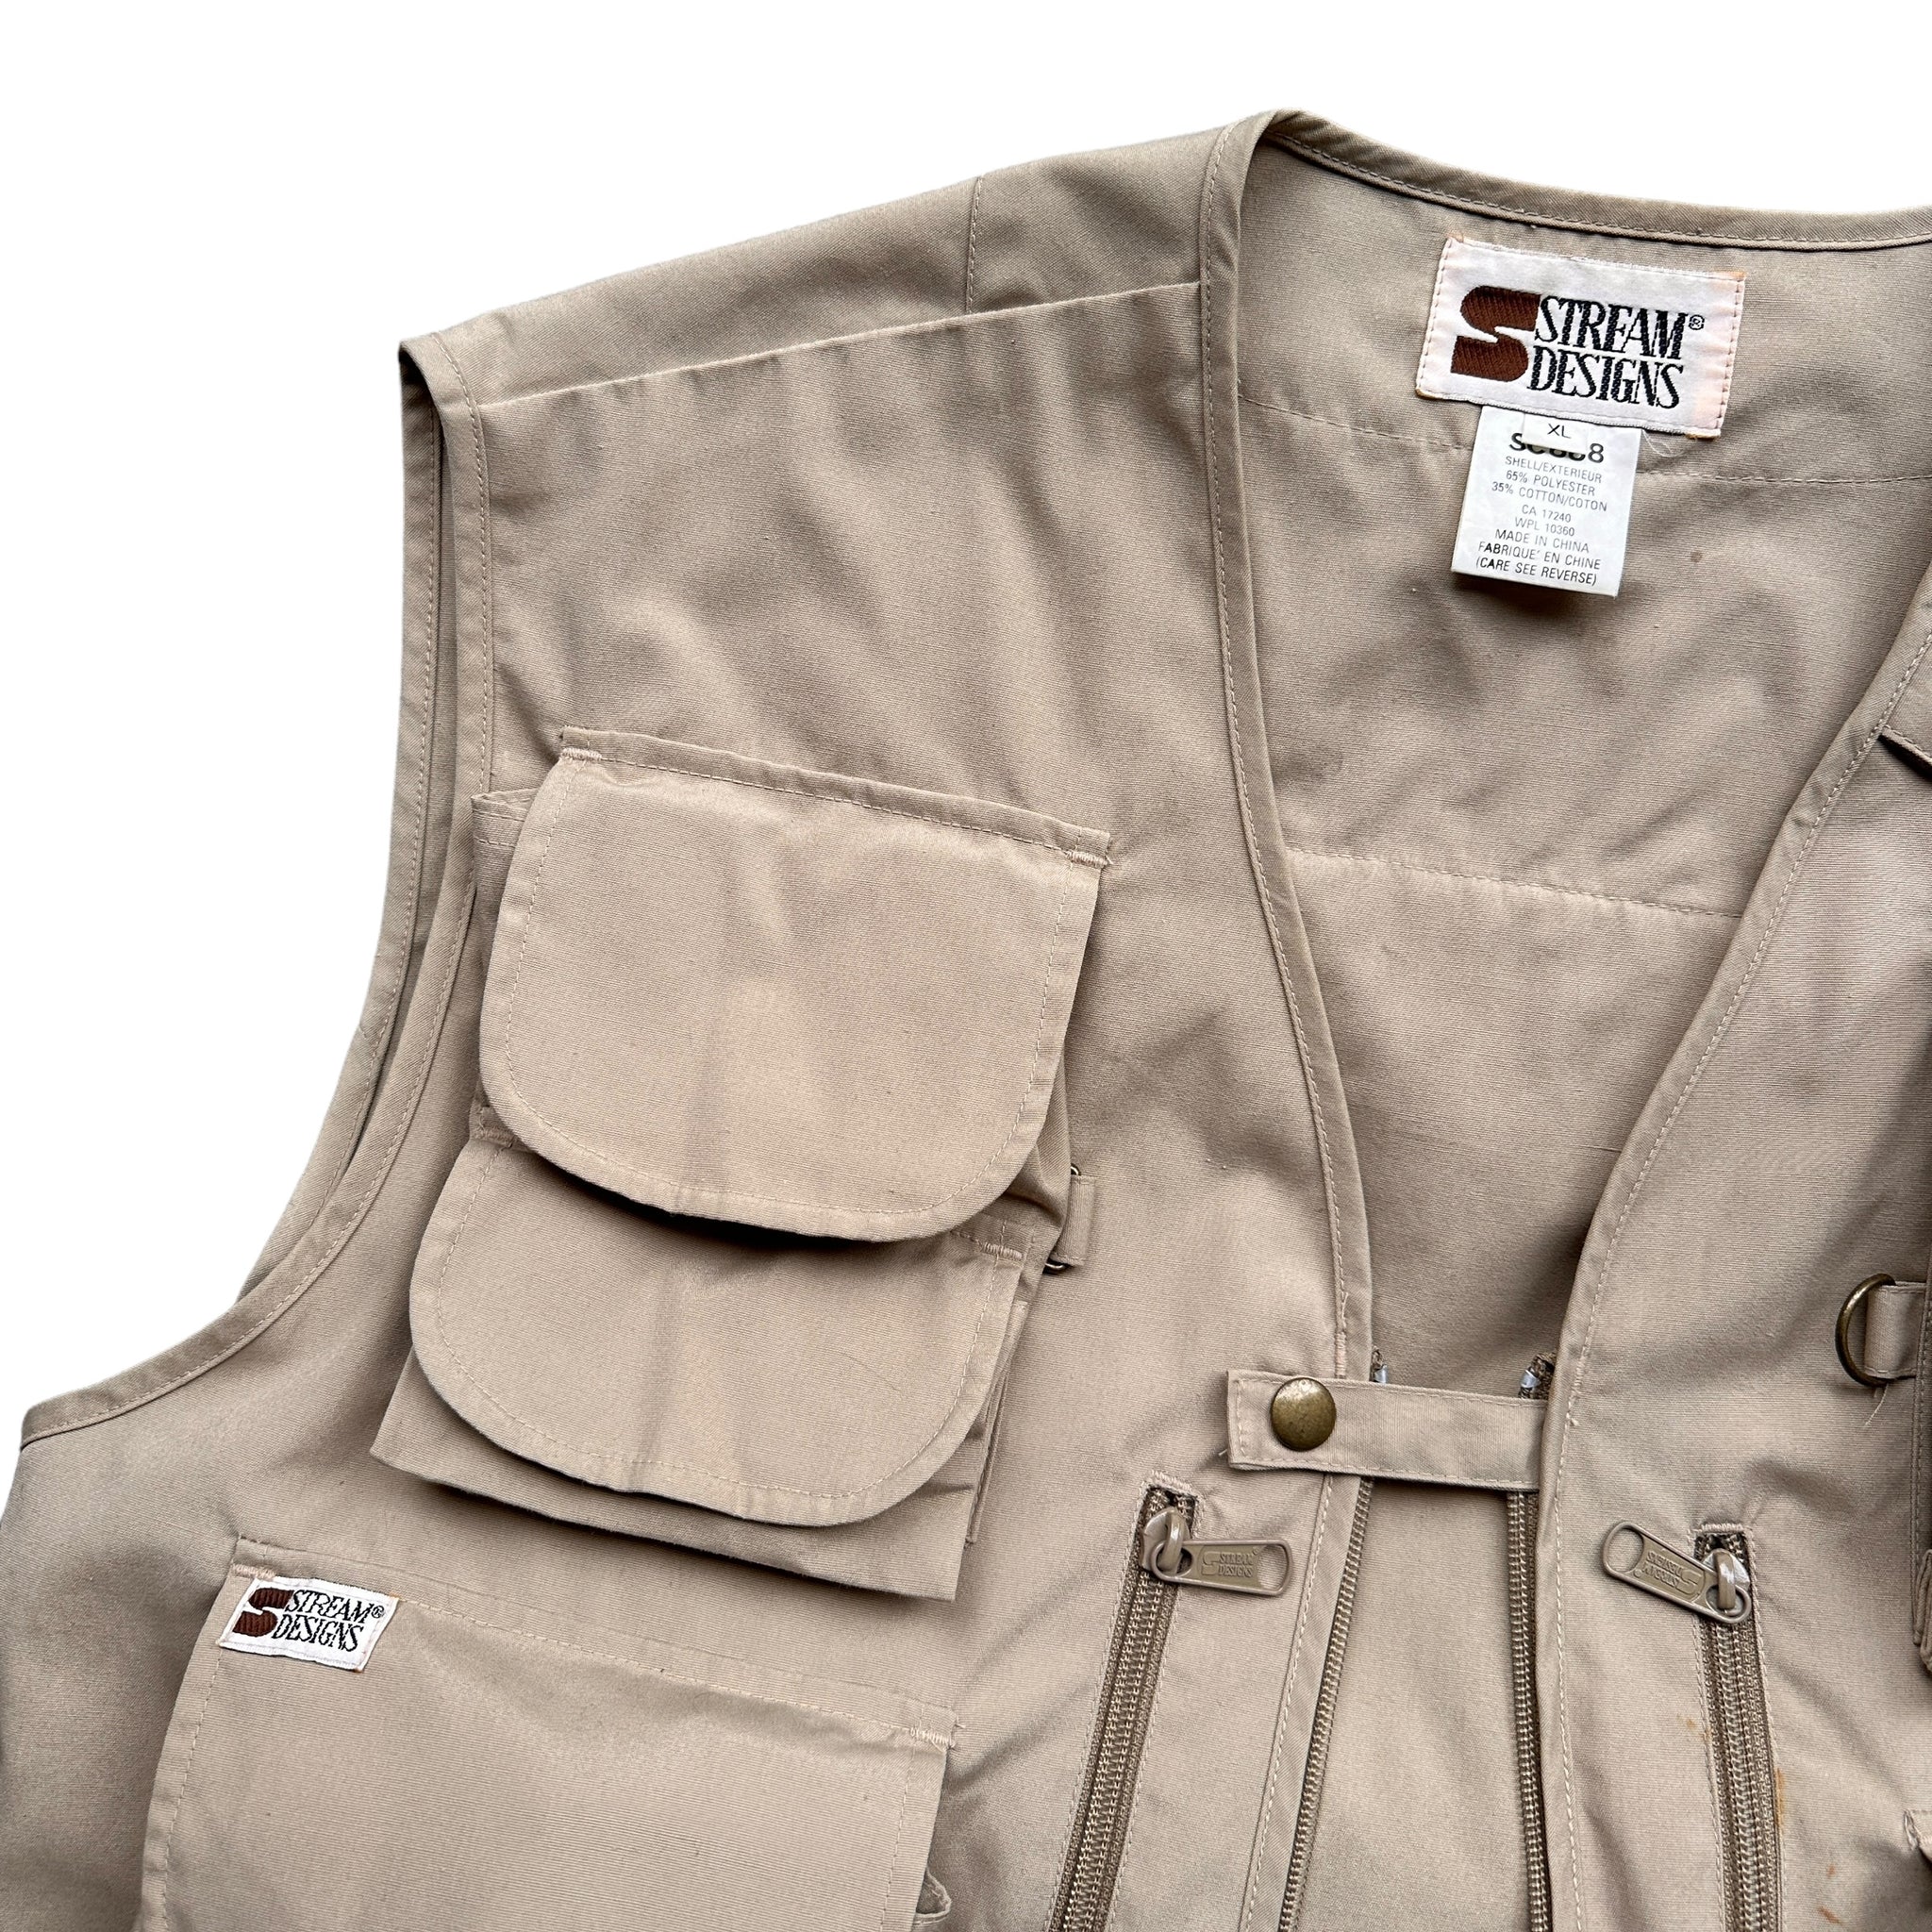 90s Fishing vest with the good pockets XL